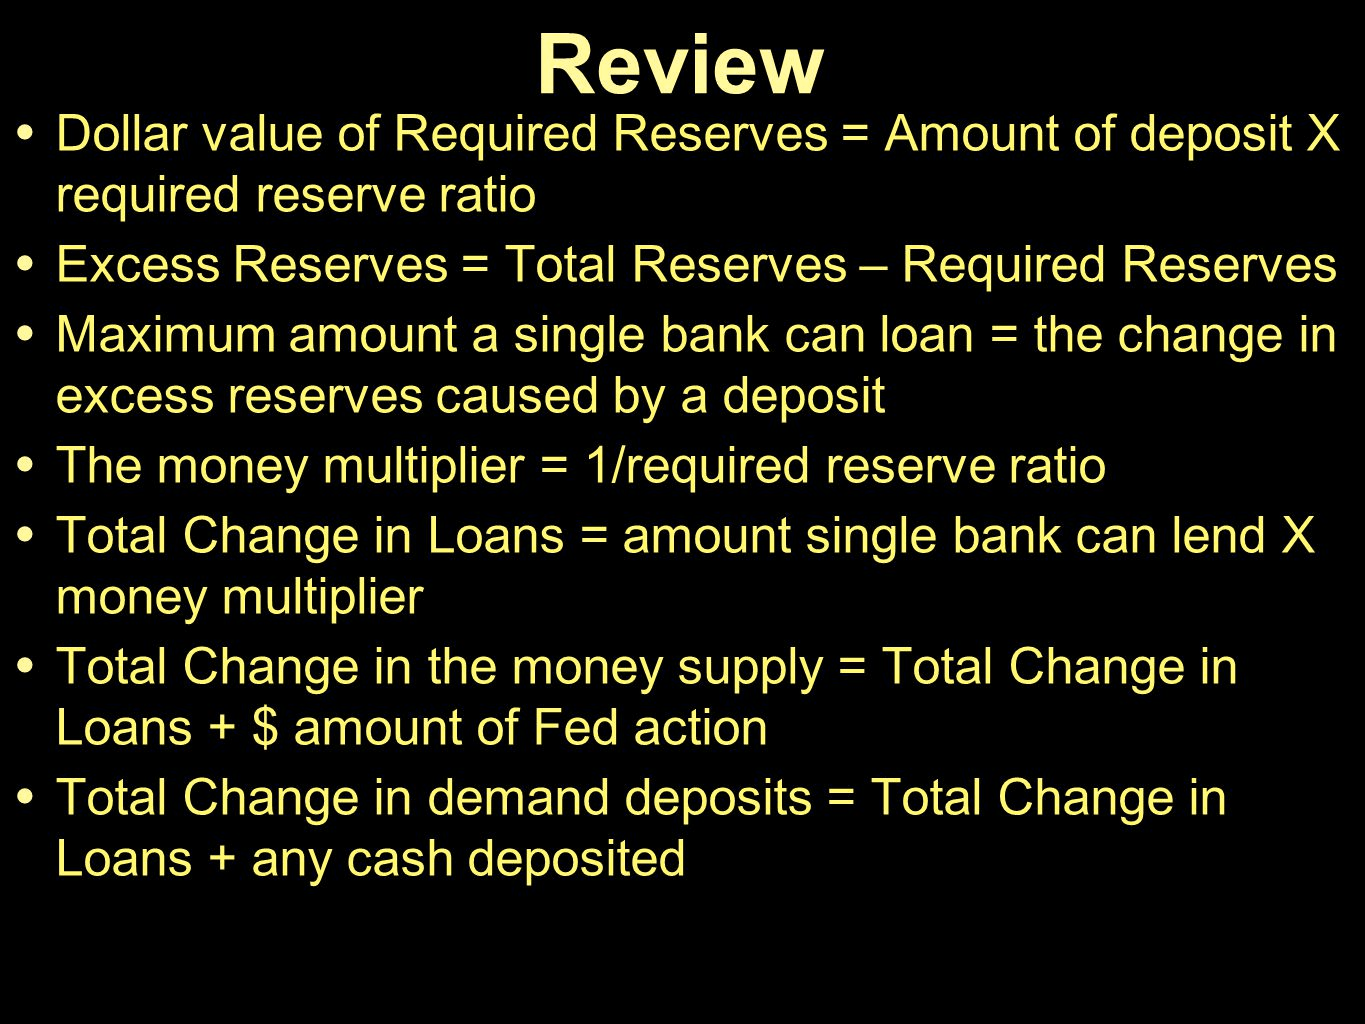 Review • Dollar value of Required Reserves = Amount of deposit X
  required reserve ratio • Excess Reserves = Total Reserves — Required
  Reserves • Maximum amount a single bank can loan = the change in
  excess reserves caused by a deposit • The money multiplier =
  l/required reserve ratio • Total Change in Loans = amount single bank
  can lend X money multiplier • Total Change in the money supply = Total
  Change in Loans + $ amount of Fed action • Total Change in demand
  deposits = Total Change in Loans + any cash deposited
  